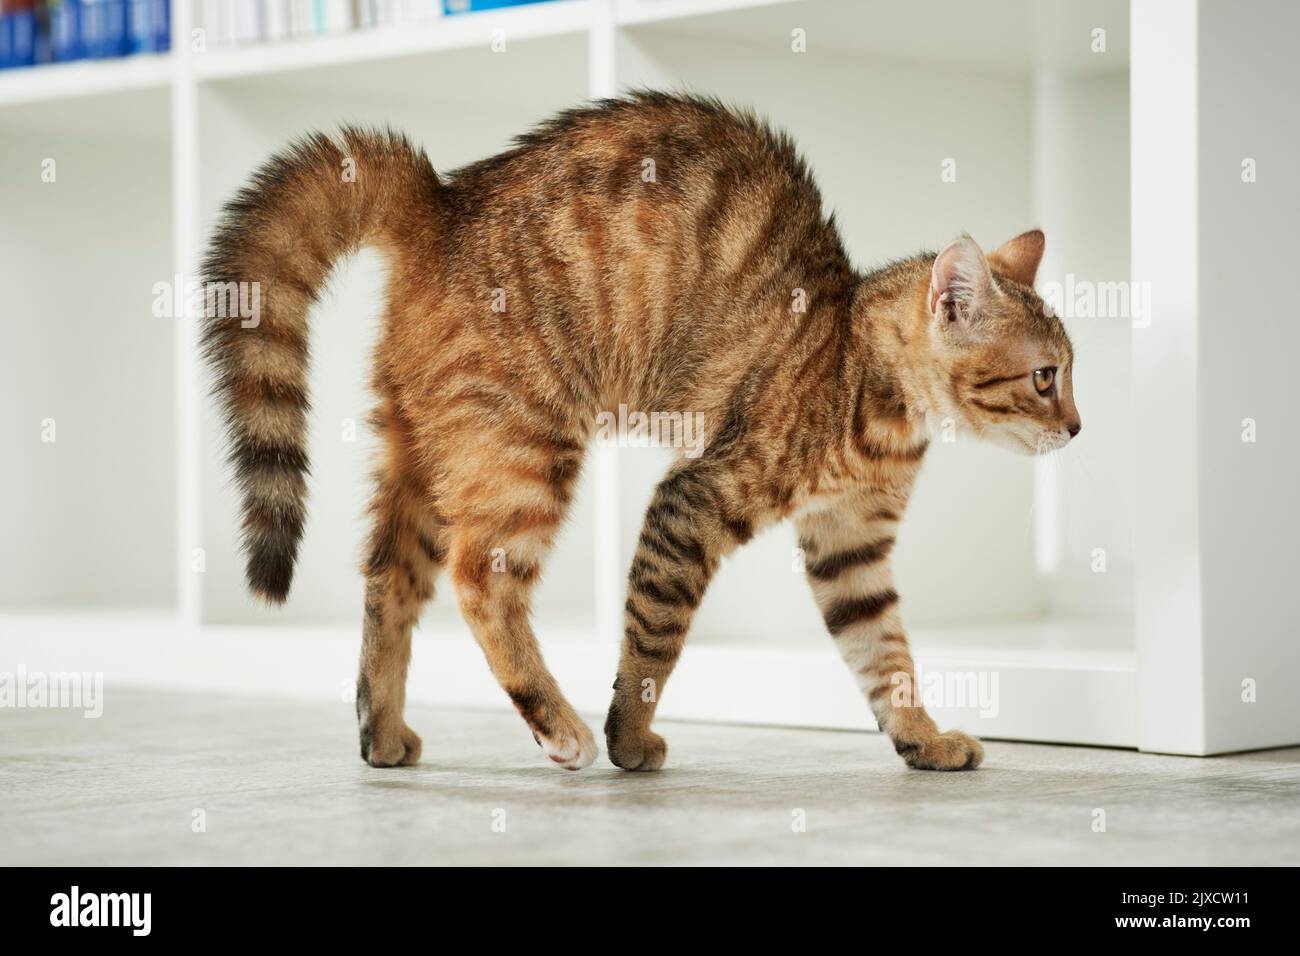 Domestic cat. A tabby kitten arches its back. Germany Stock Photo